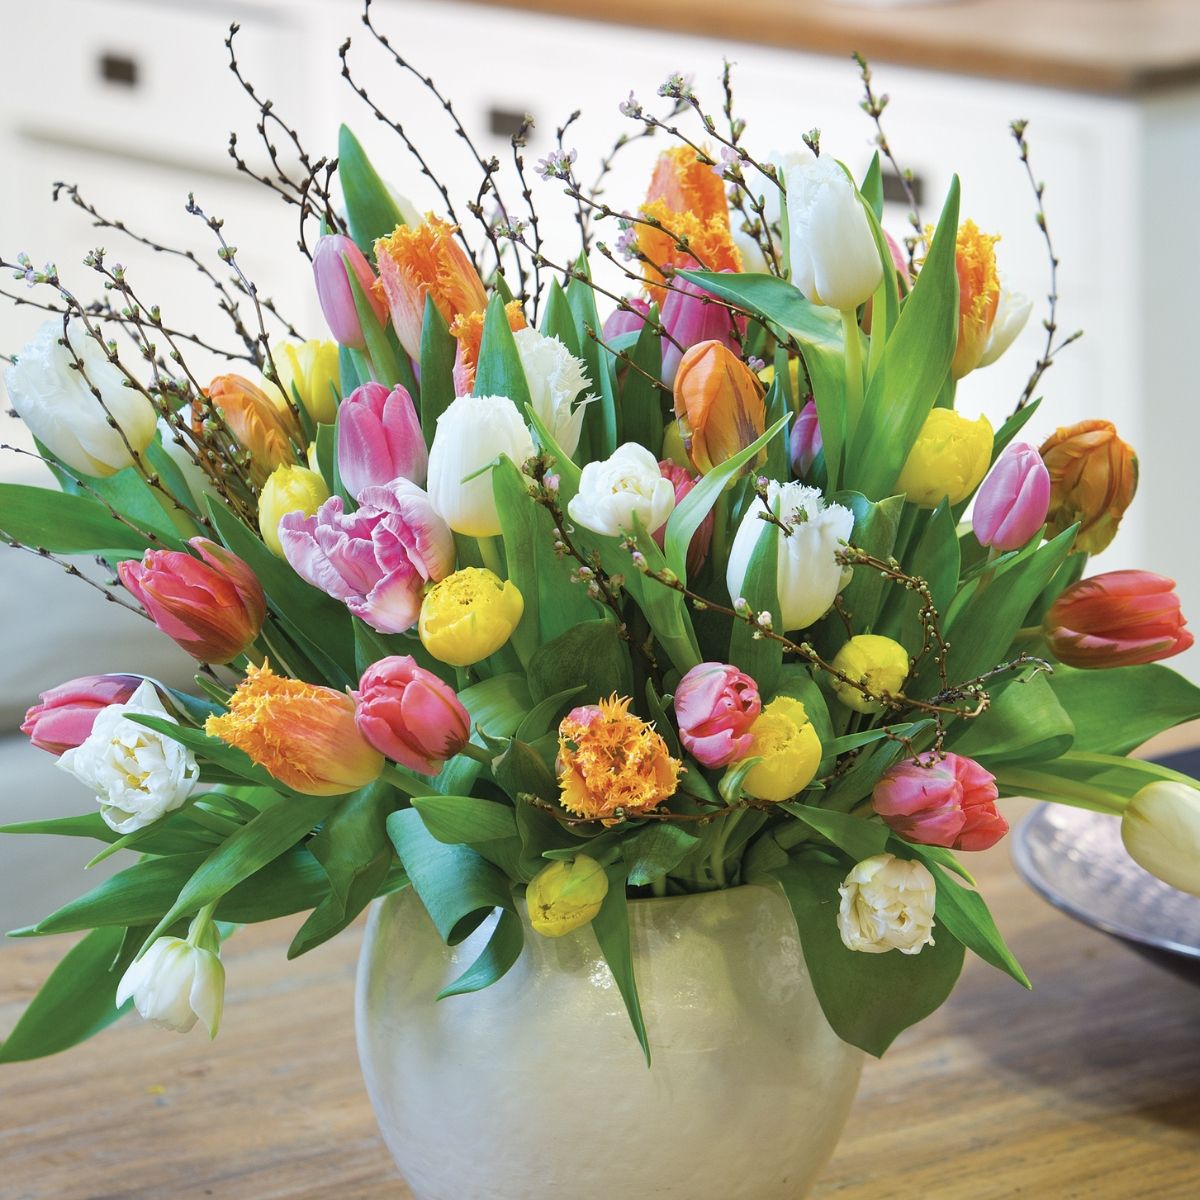 Colorful Vases Parade with Tulips - Article on Thursd